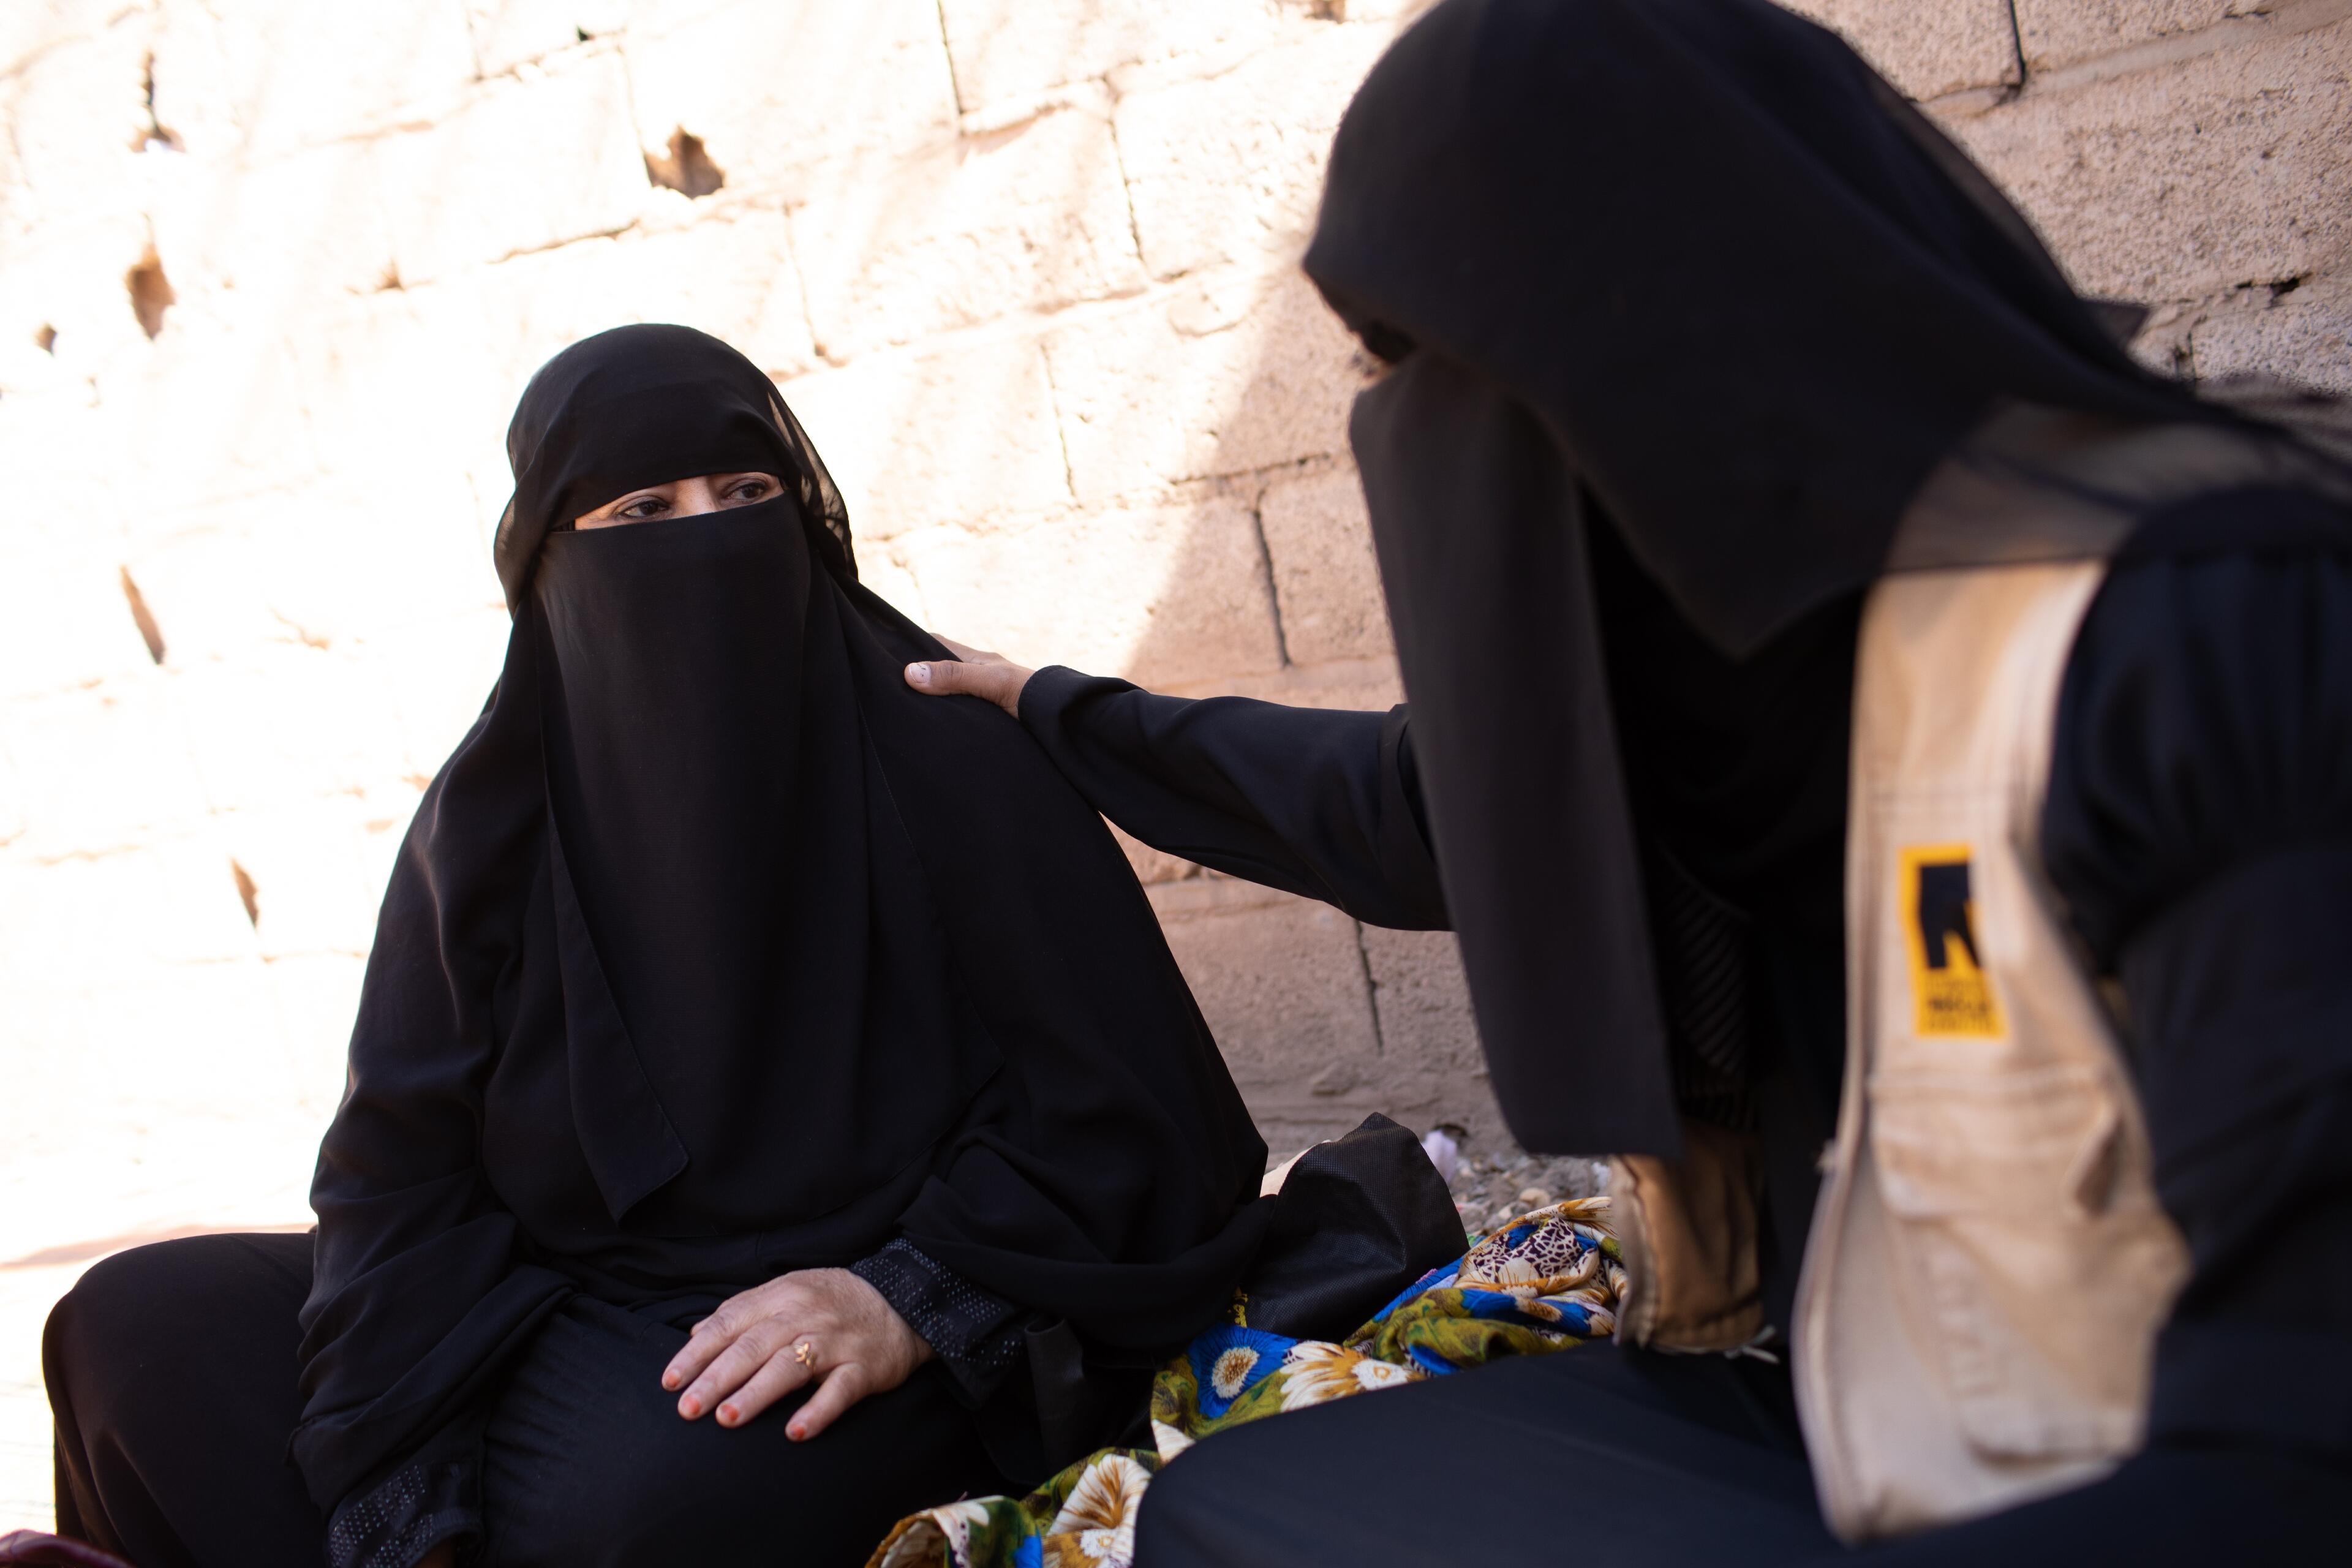 An IRC womens protection and empowerment staff member places her hand on a womans shoulder as they speak in Yemen.